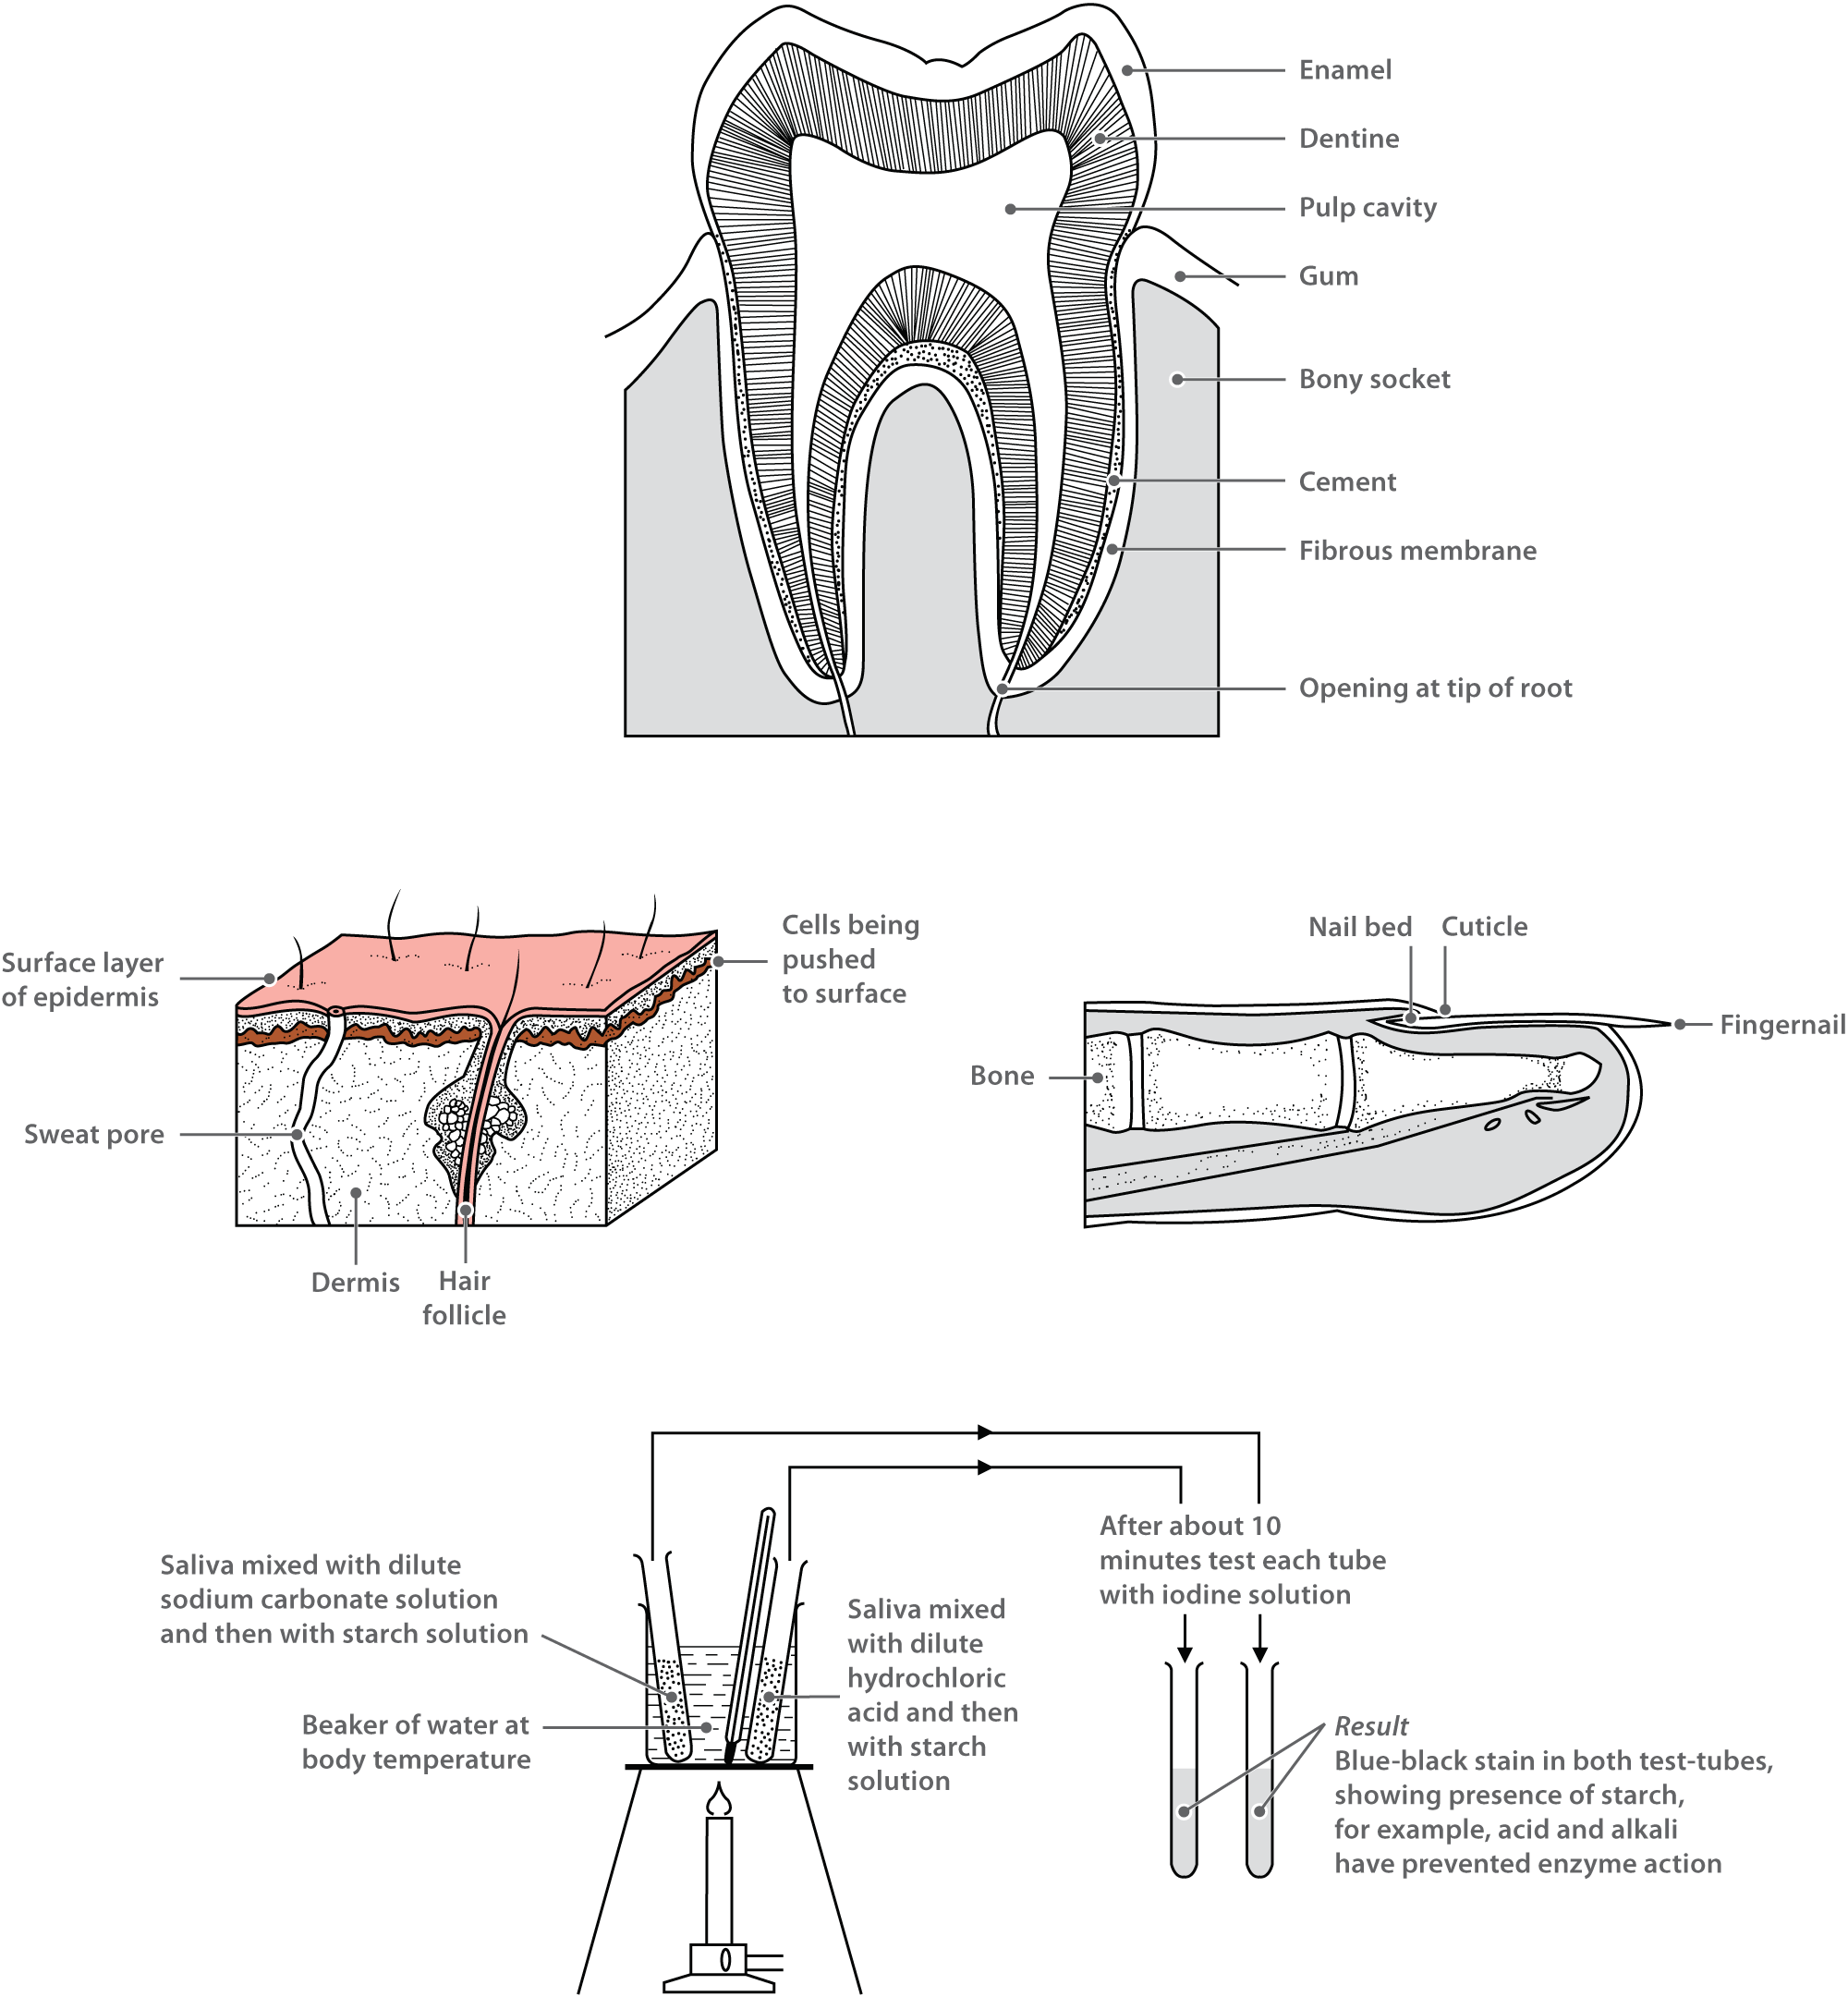 Technical illustration of 4 drawings: tooth, hair scalp, finger nail, and bunsen burner